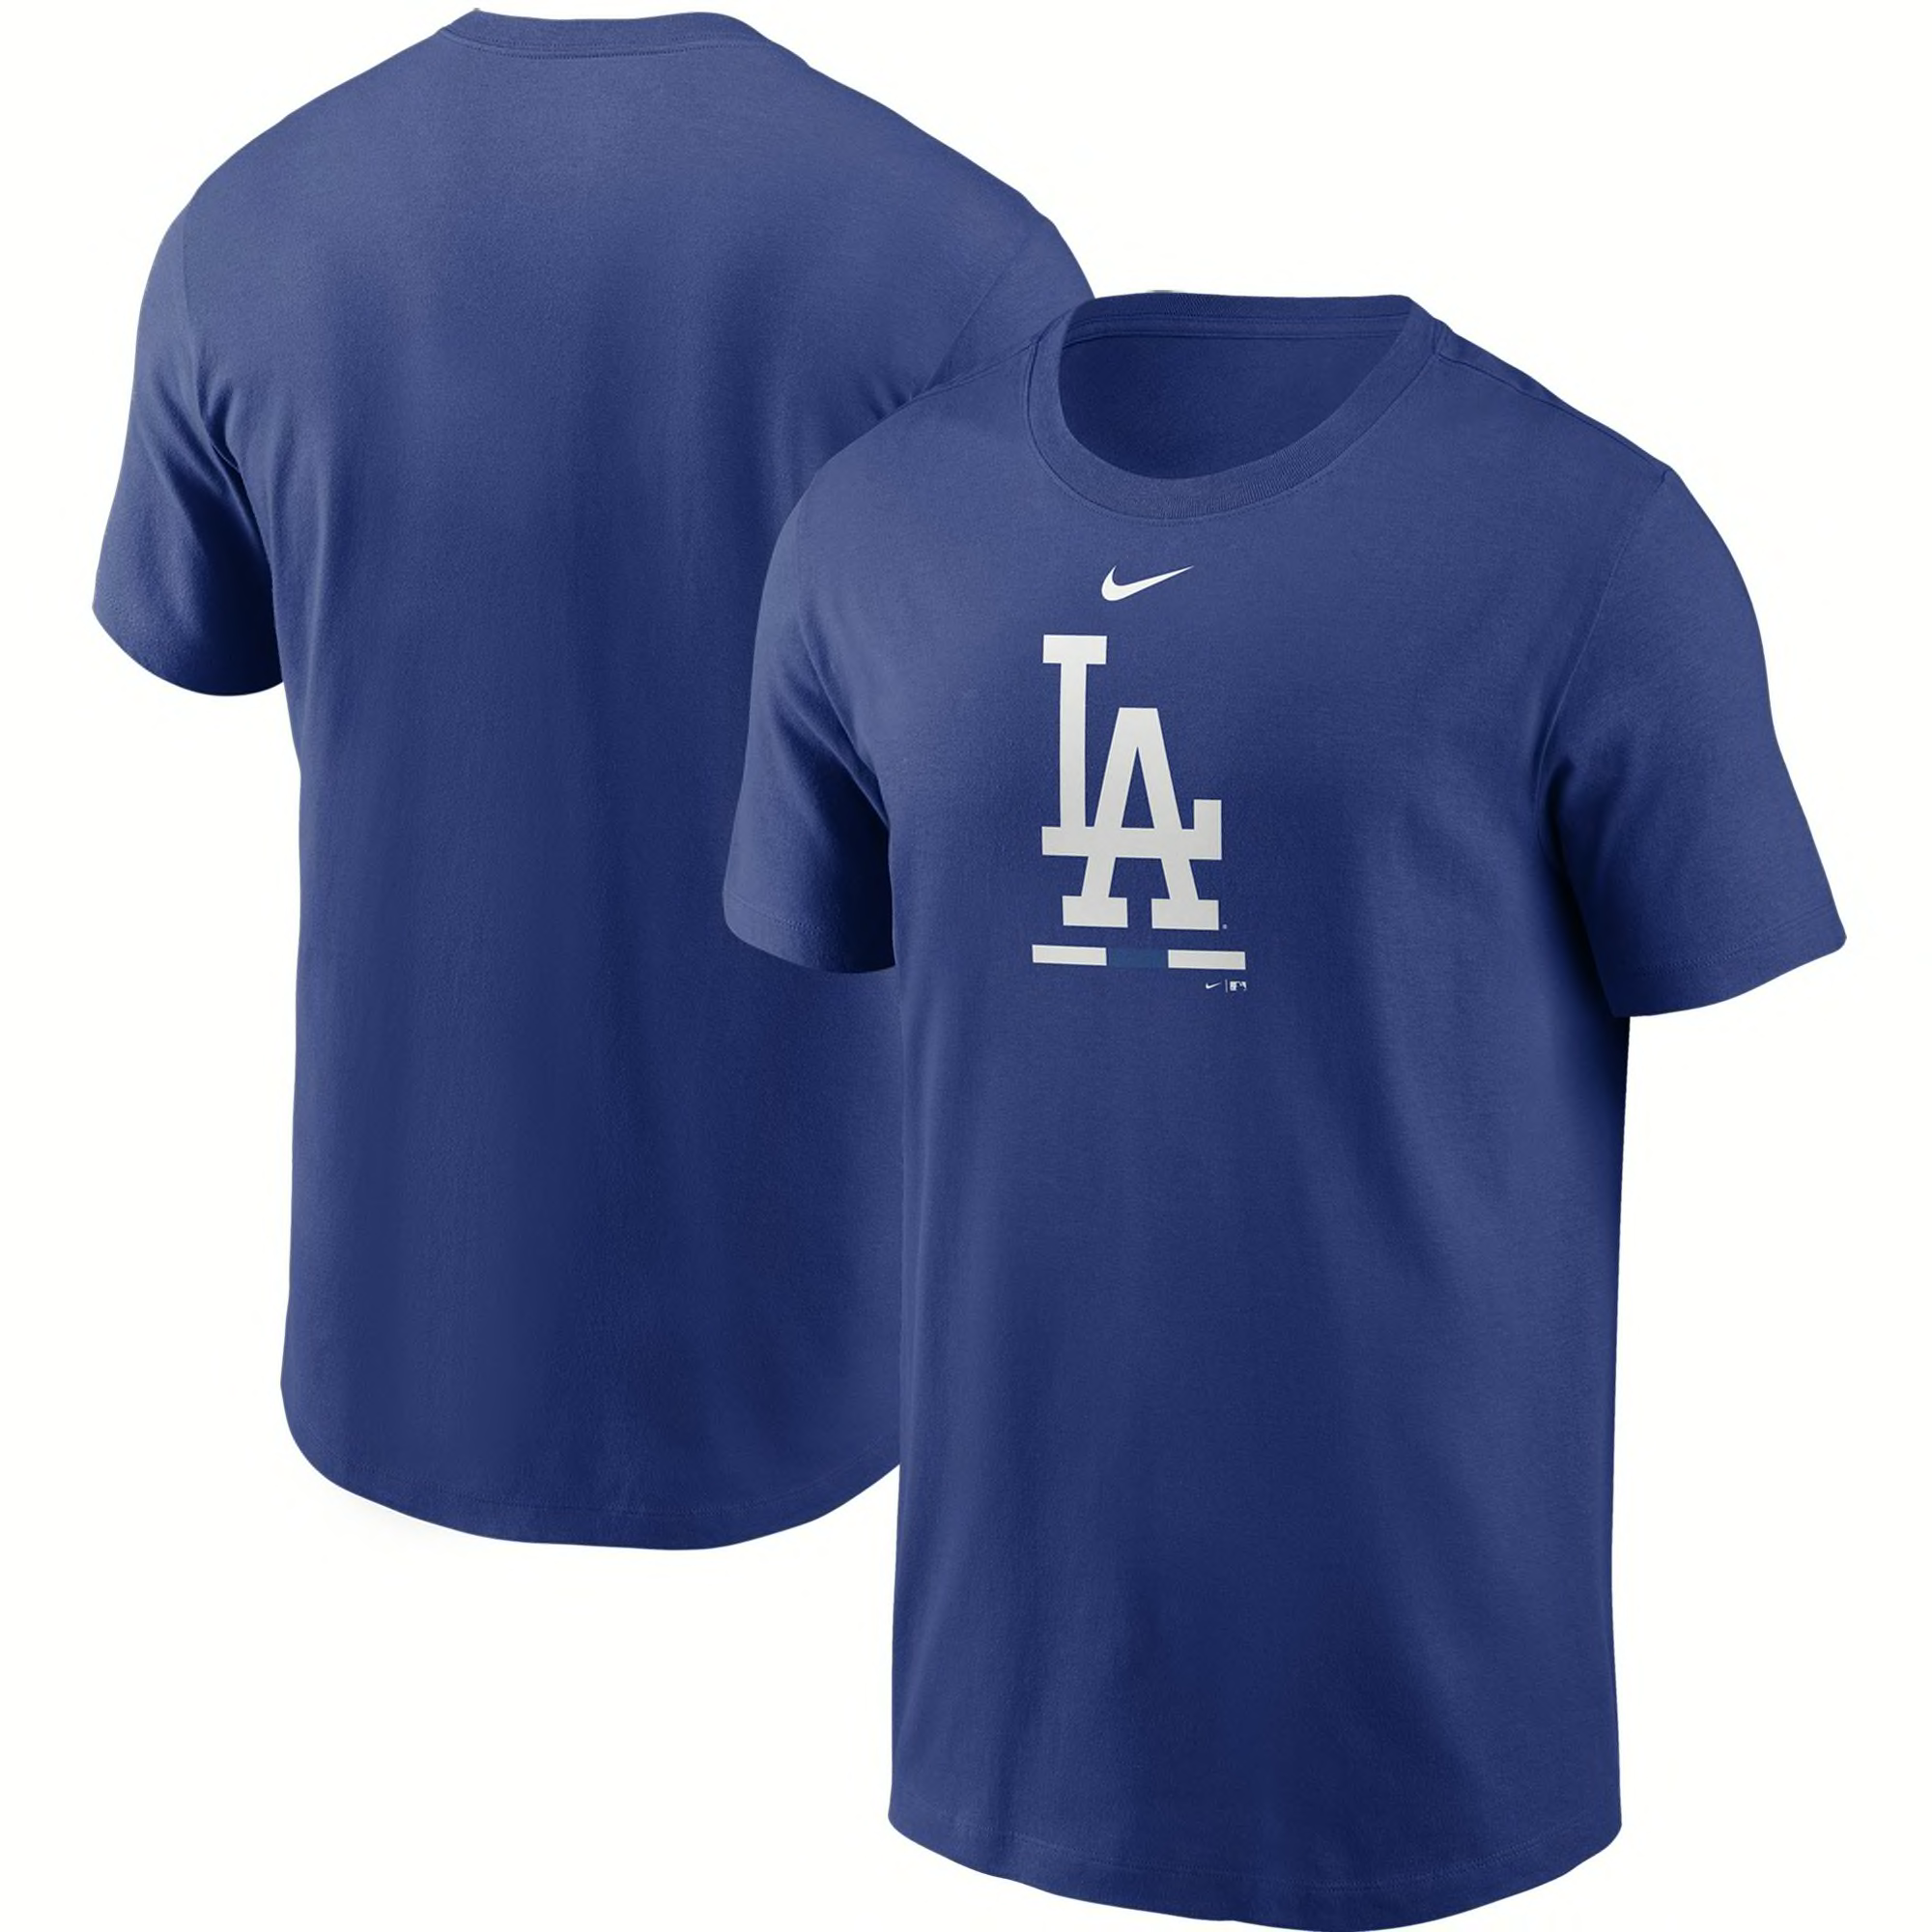 Father's Day gifts for the Los Angeles Dodgers fan